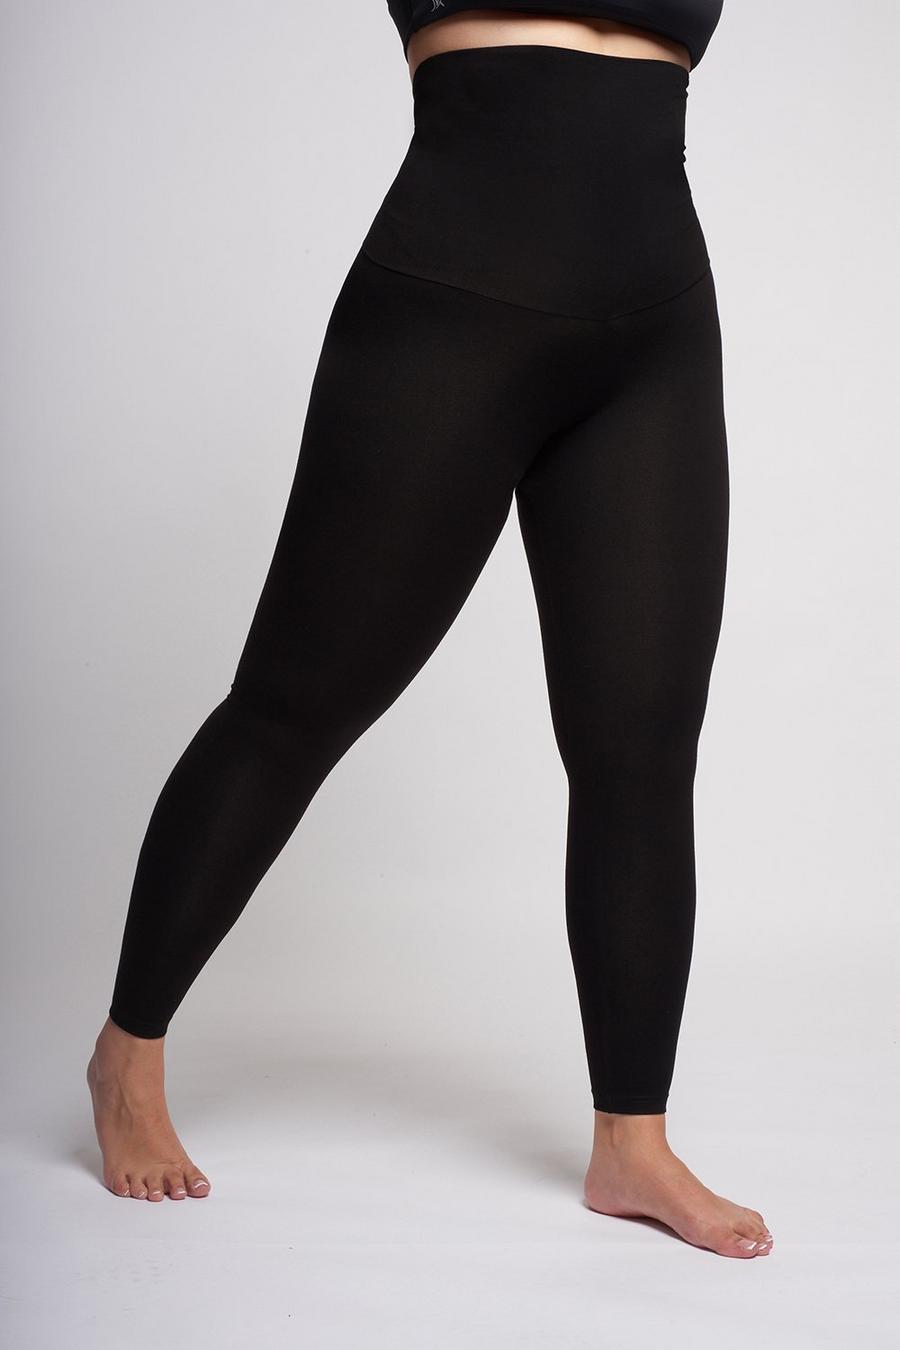 Black Lightweight Strong Compression Leggings with High Tummy Control